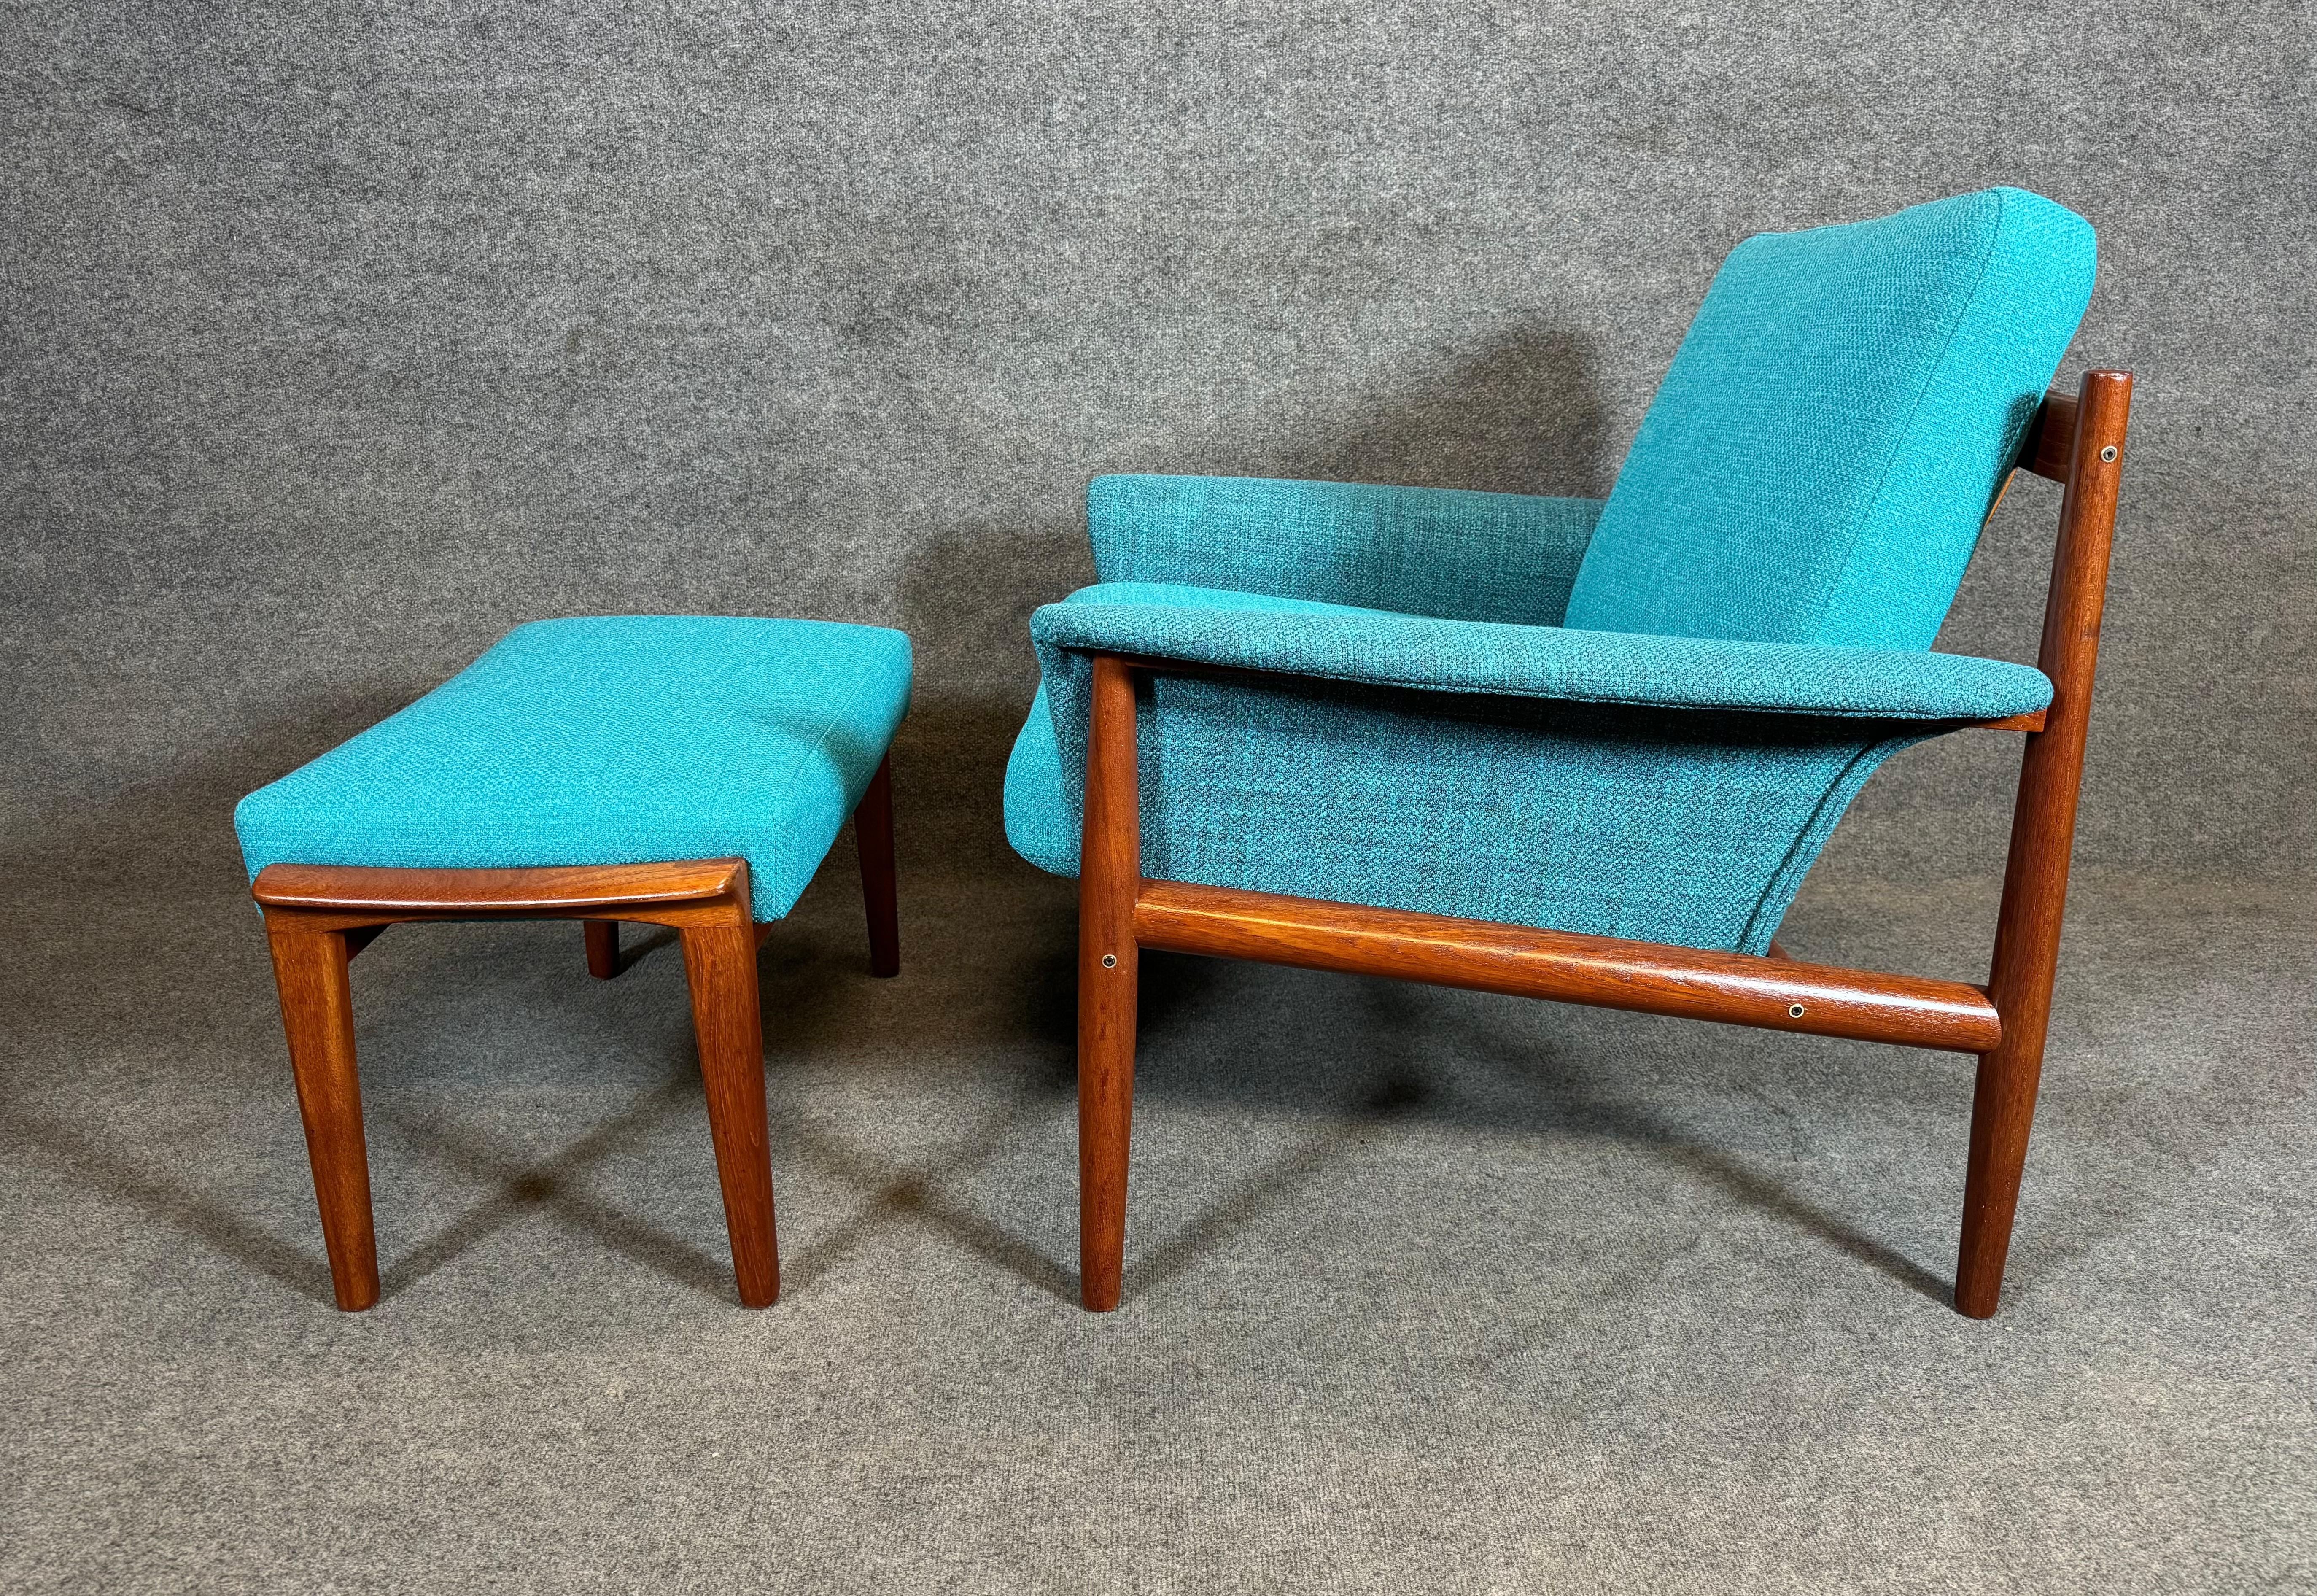 Here is a beautiful Scandinavian modern easy chair in solid teak designed by Grete Jalk and manufactured by France & Son in Denmark in the 1960's paired with a period correct ottoman made in Sweden by Broderna Andersson.
This comfortable set,